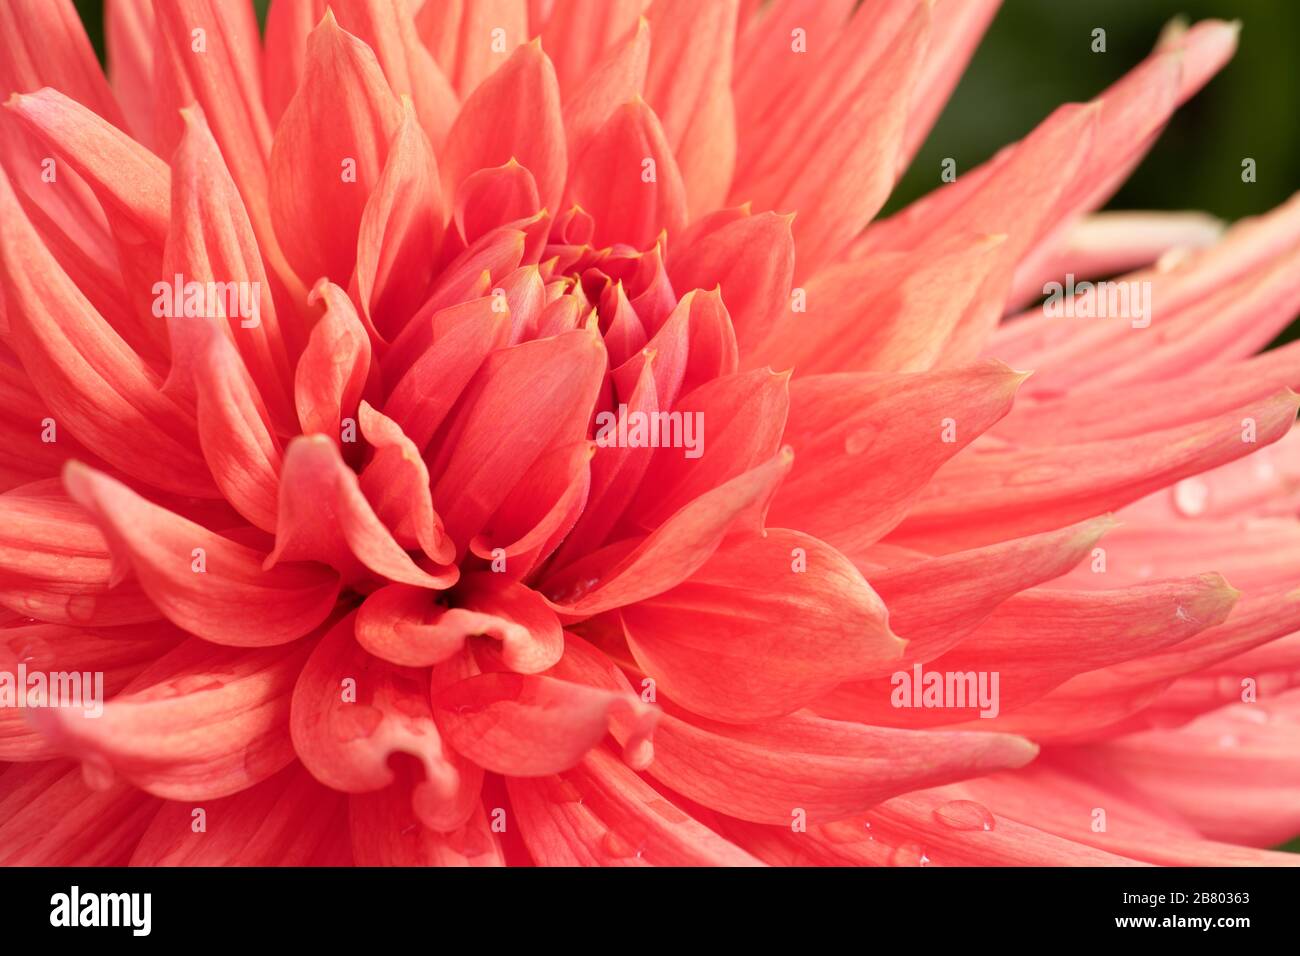 Dahlias come in a number of colors, shapes, and sizes. This is a beautiful salmon-colored Semi Cactus Dahlia. Stock Photo